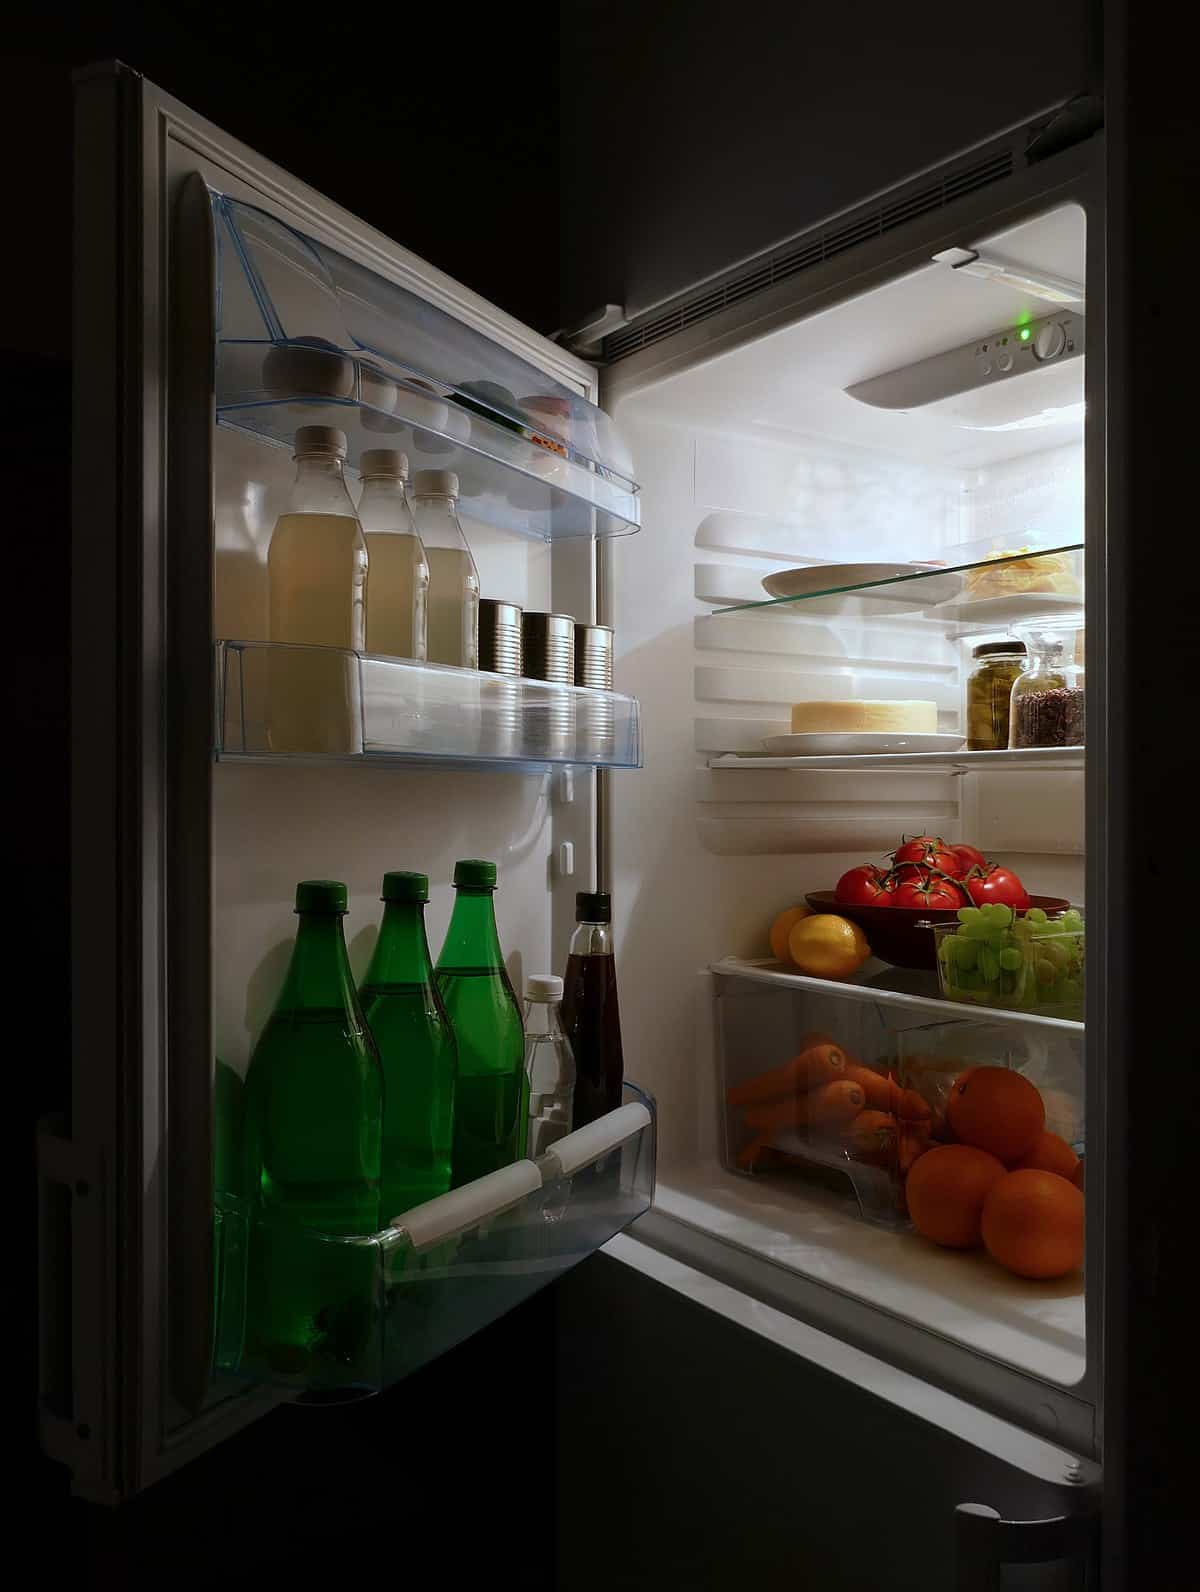 Can i use automotive r134a in a refrigerator